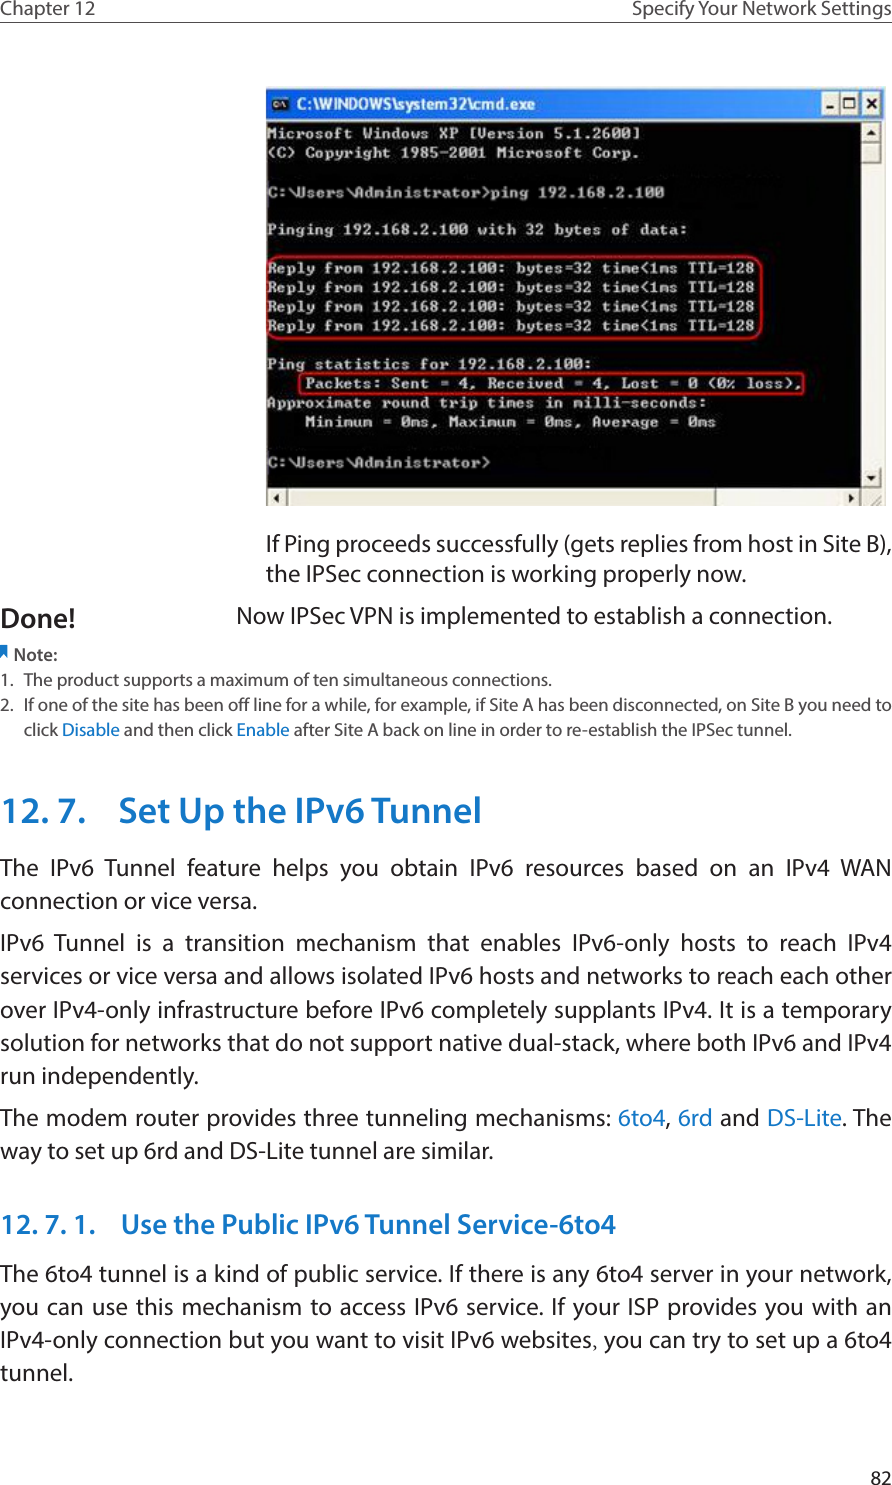 82Chapter 12 Specify Your Network SettingsIf Ping proceeds successfully (gets replies from host in Site B), the IPSec connection is working properly now.Now IPSec VPN is implemented to establish a connection.Note: 1.  The product supports a maximum of ten simultaneous connections.2.  If one of the site has been off line for a while, for example, if Site A has been disconnected, on Site B you need to click Disable and then click Enable after Site A back on line in order to re-establish the IPSec tunnel.12. 7.  Set Up the IPv6 TunnelThe IPv6 Tunnel feature helps you obtain IPv6 resources based on an IPv4 WAN connection or vice versa.IPv6 Tunnel is a transition mechanism that enables IPv6-only hosts to reach IPv4 services or vice versa and allows isolated IPv6 hosts and networks to reach each other over IPv4-only infrastructure before IPv6 completely supplants IPv4. It is a temporary solution for networks that do not support native dual-stack, where both IPv6 and IPv4 run independently.The modem router provides three tunneling mechanisms: 6to4, 6rd and DS-Lite. The way to set up 6rd and DS-Lite tunnel are similar.12. 7. 1.  Use the Public IPv6 Tunnel Service-6to4The 6to4 tunnel is a kind of public service. If there is any 6to4 server in your network, you can use this mechanism to access IPv6 service. If your ISP provides you with an IPv4-only connection but you want to visit IPv6 websites, you can try to set up a 6to4 tunnel.Done!